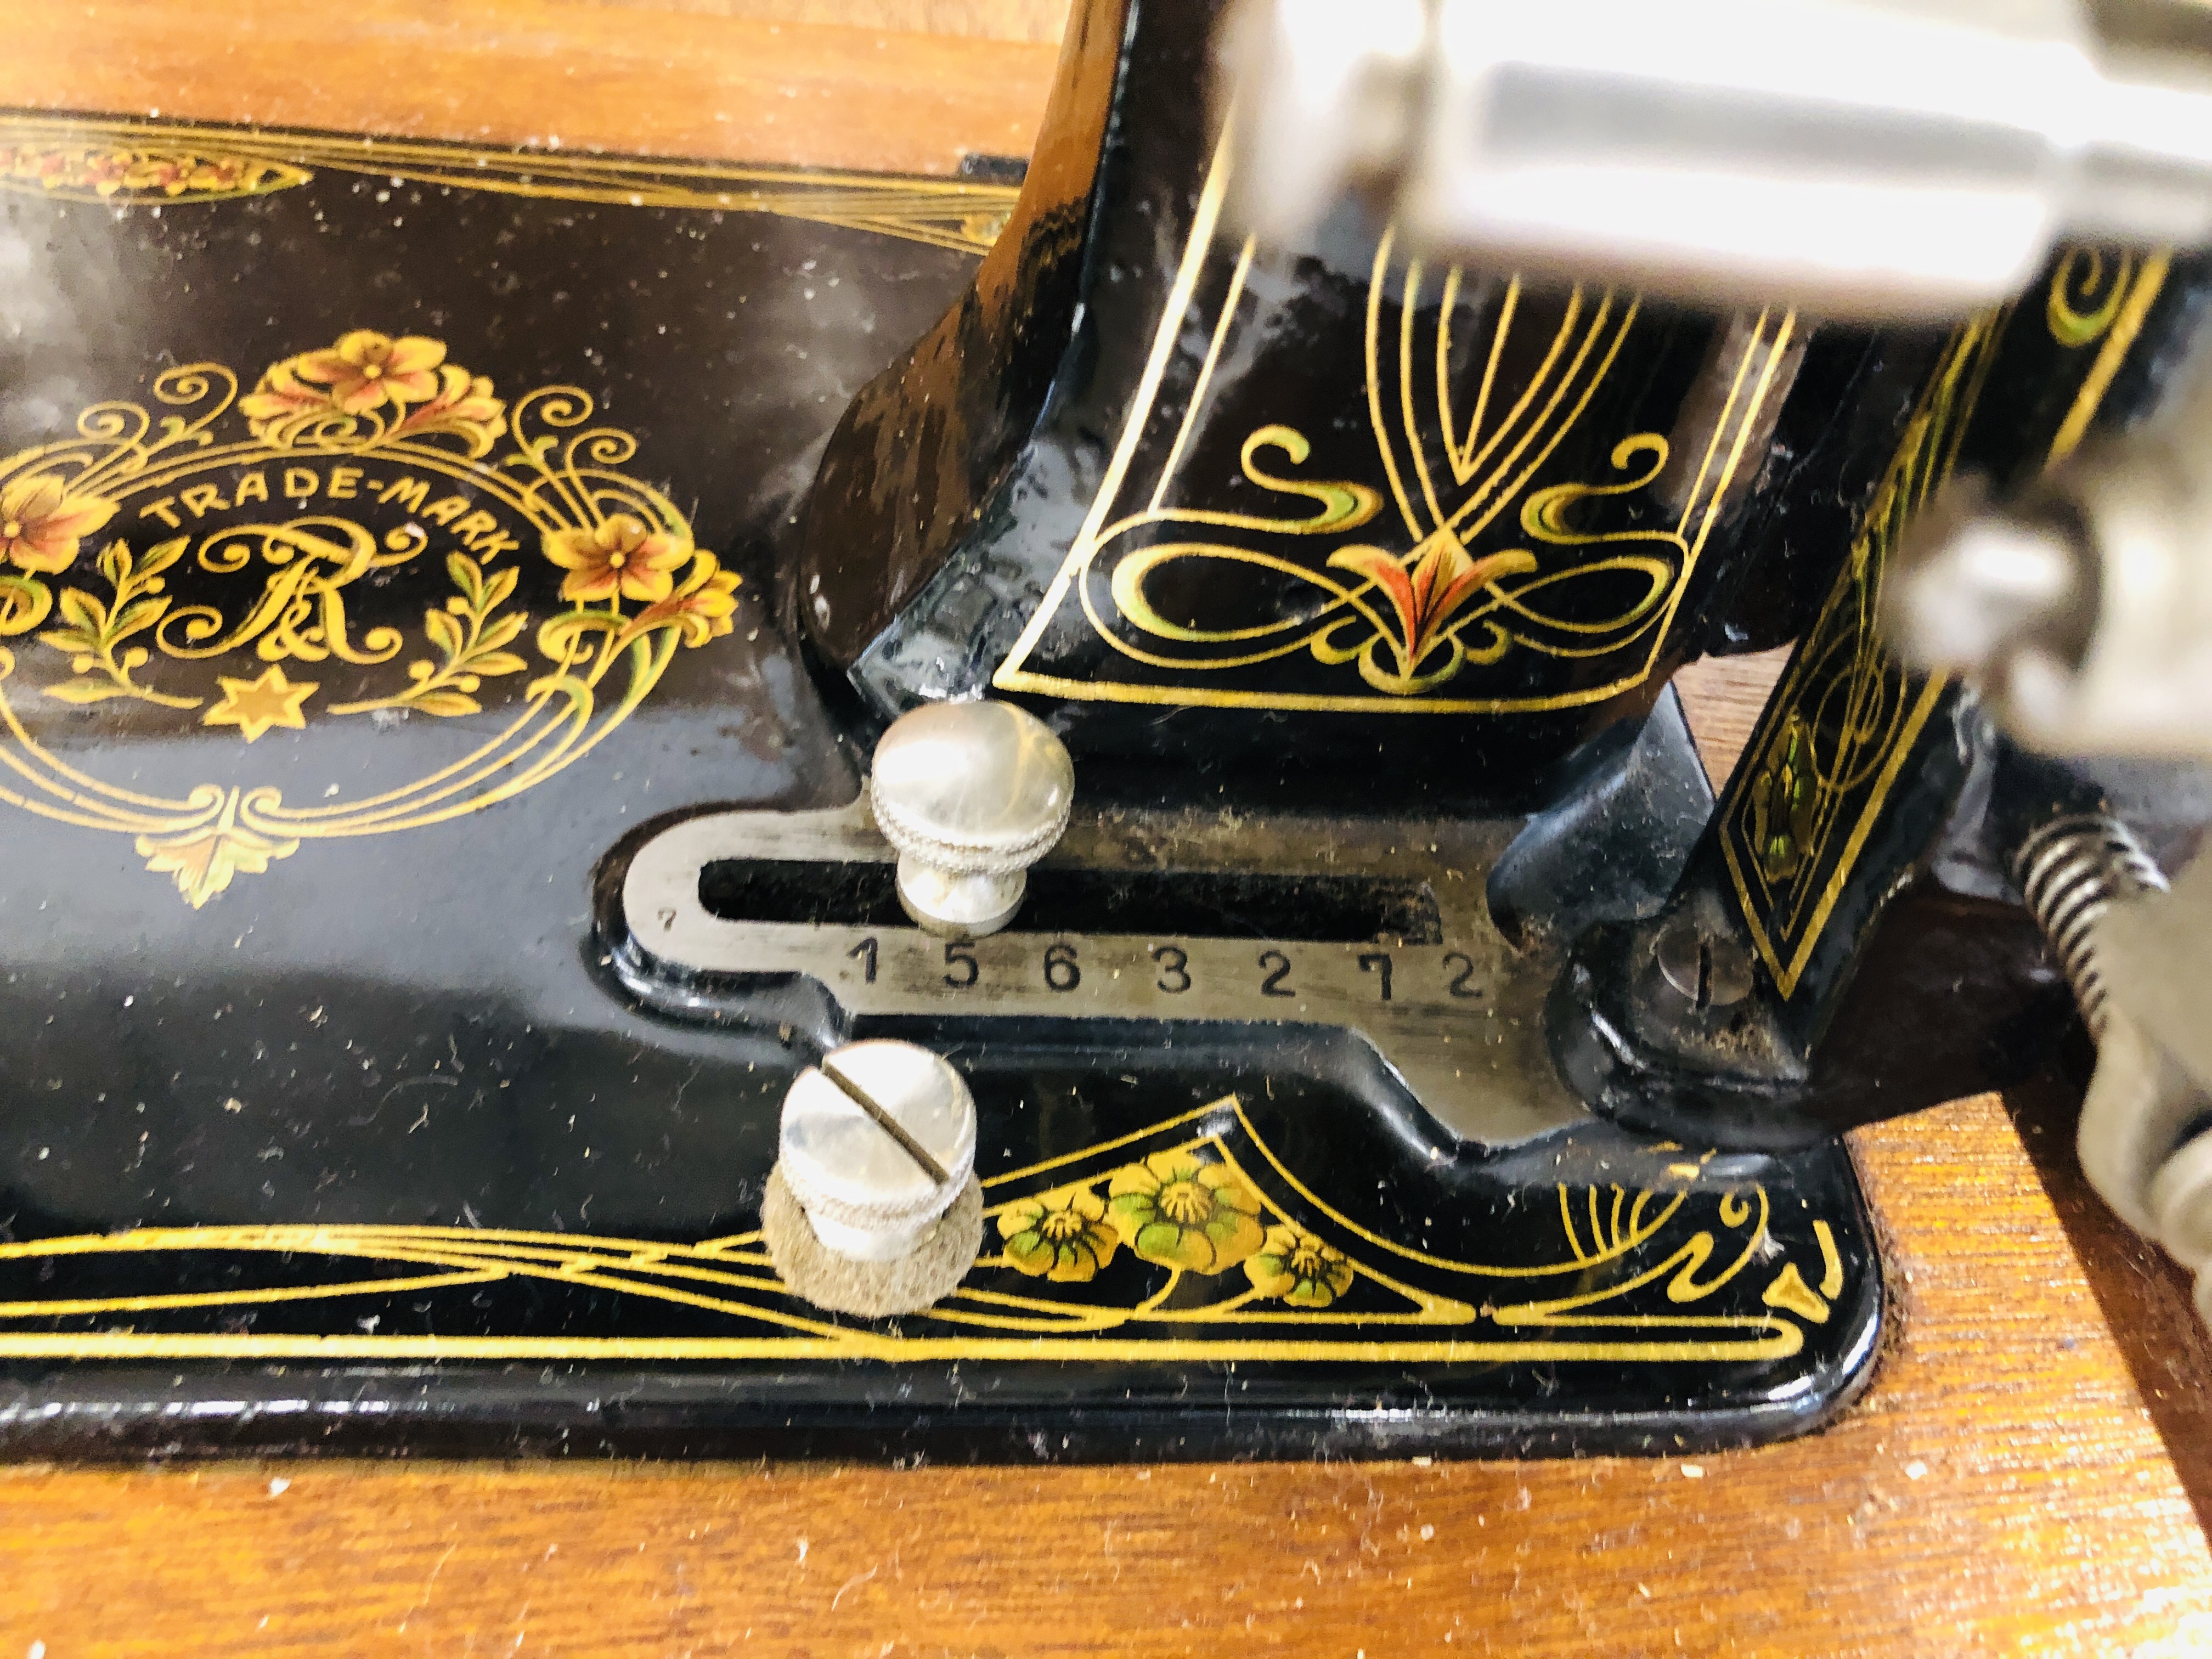 A VINTAGE GILT DECORATED FRISTER & ROSSMANN SEWING MACHINE COMPLETE WITH COVER - SOLD AS SEEN. - Image 4 of 6